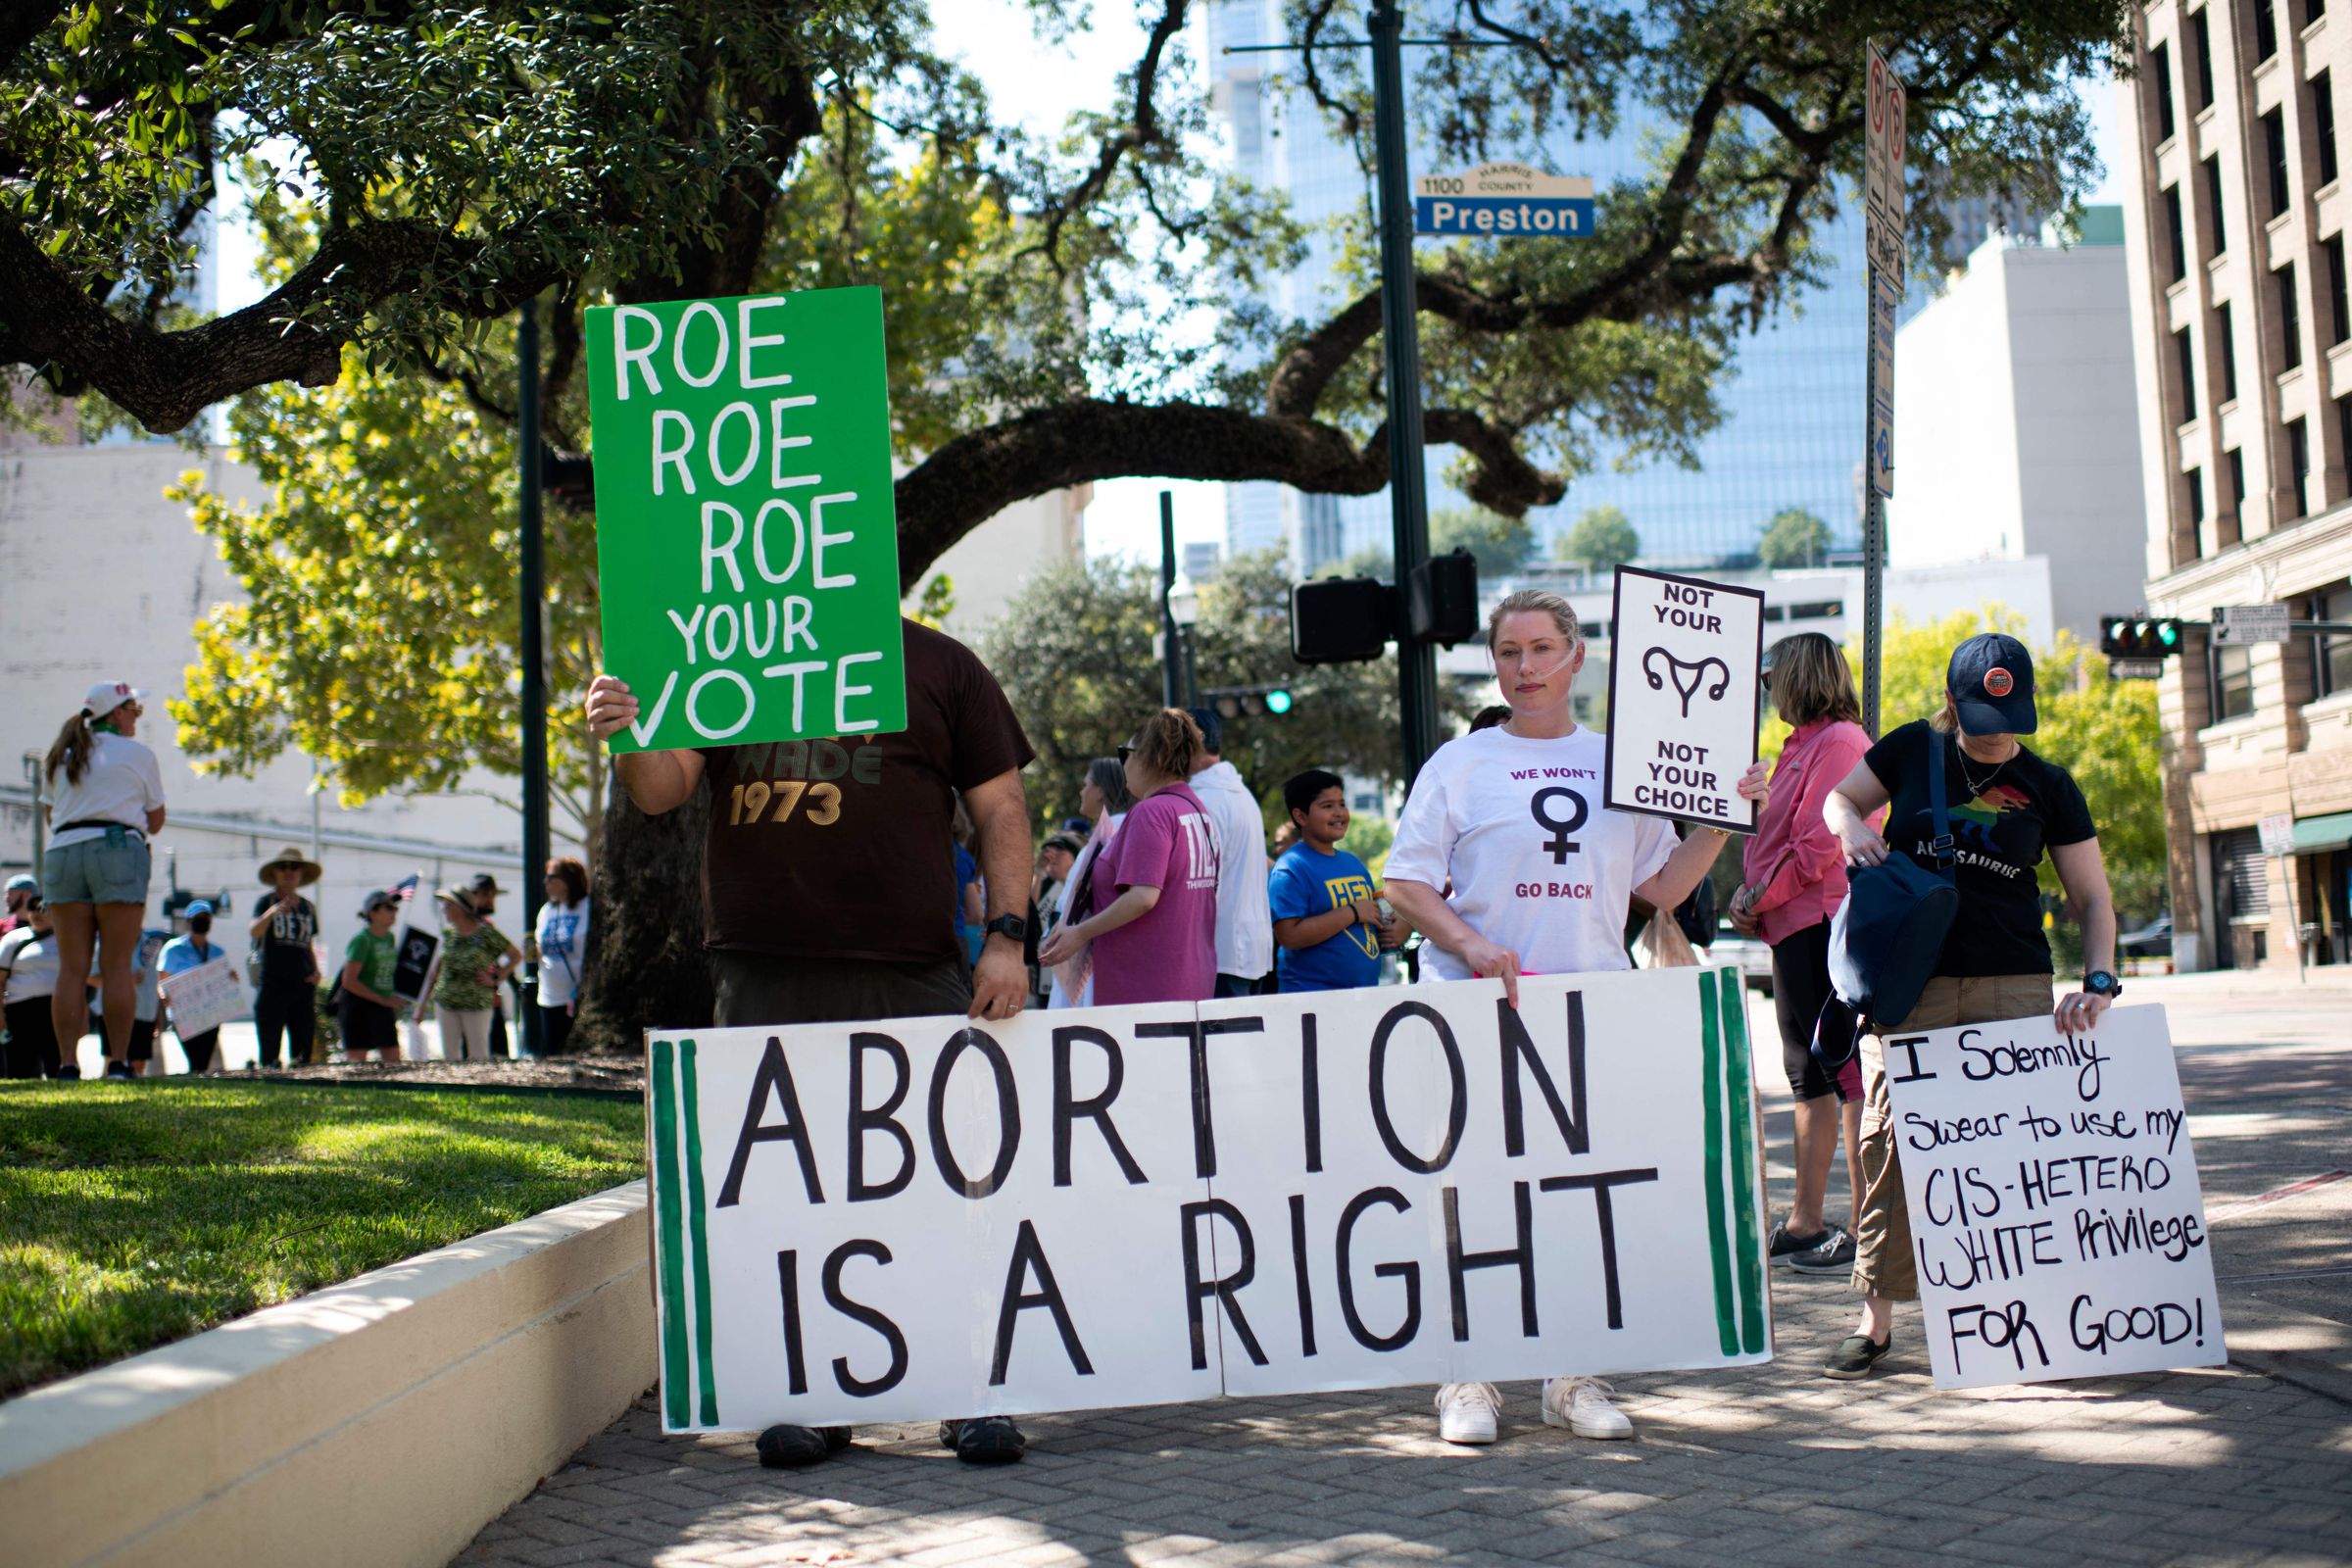 Abortion websites would be blocked in Texas under new bill